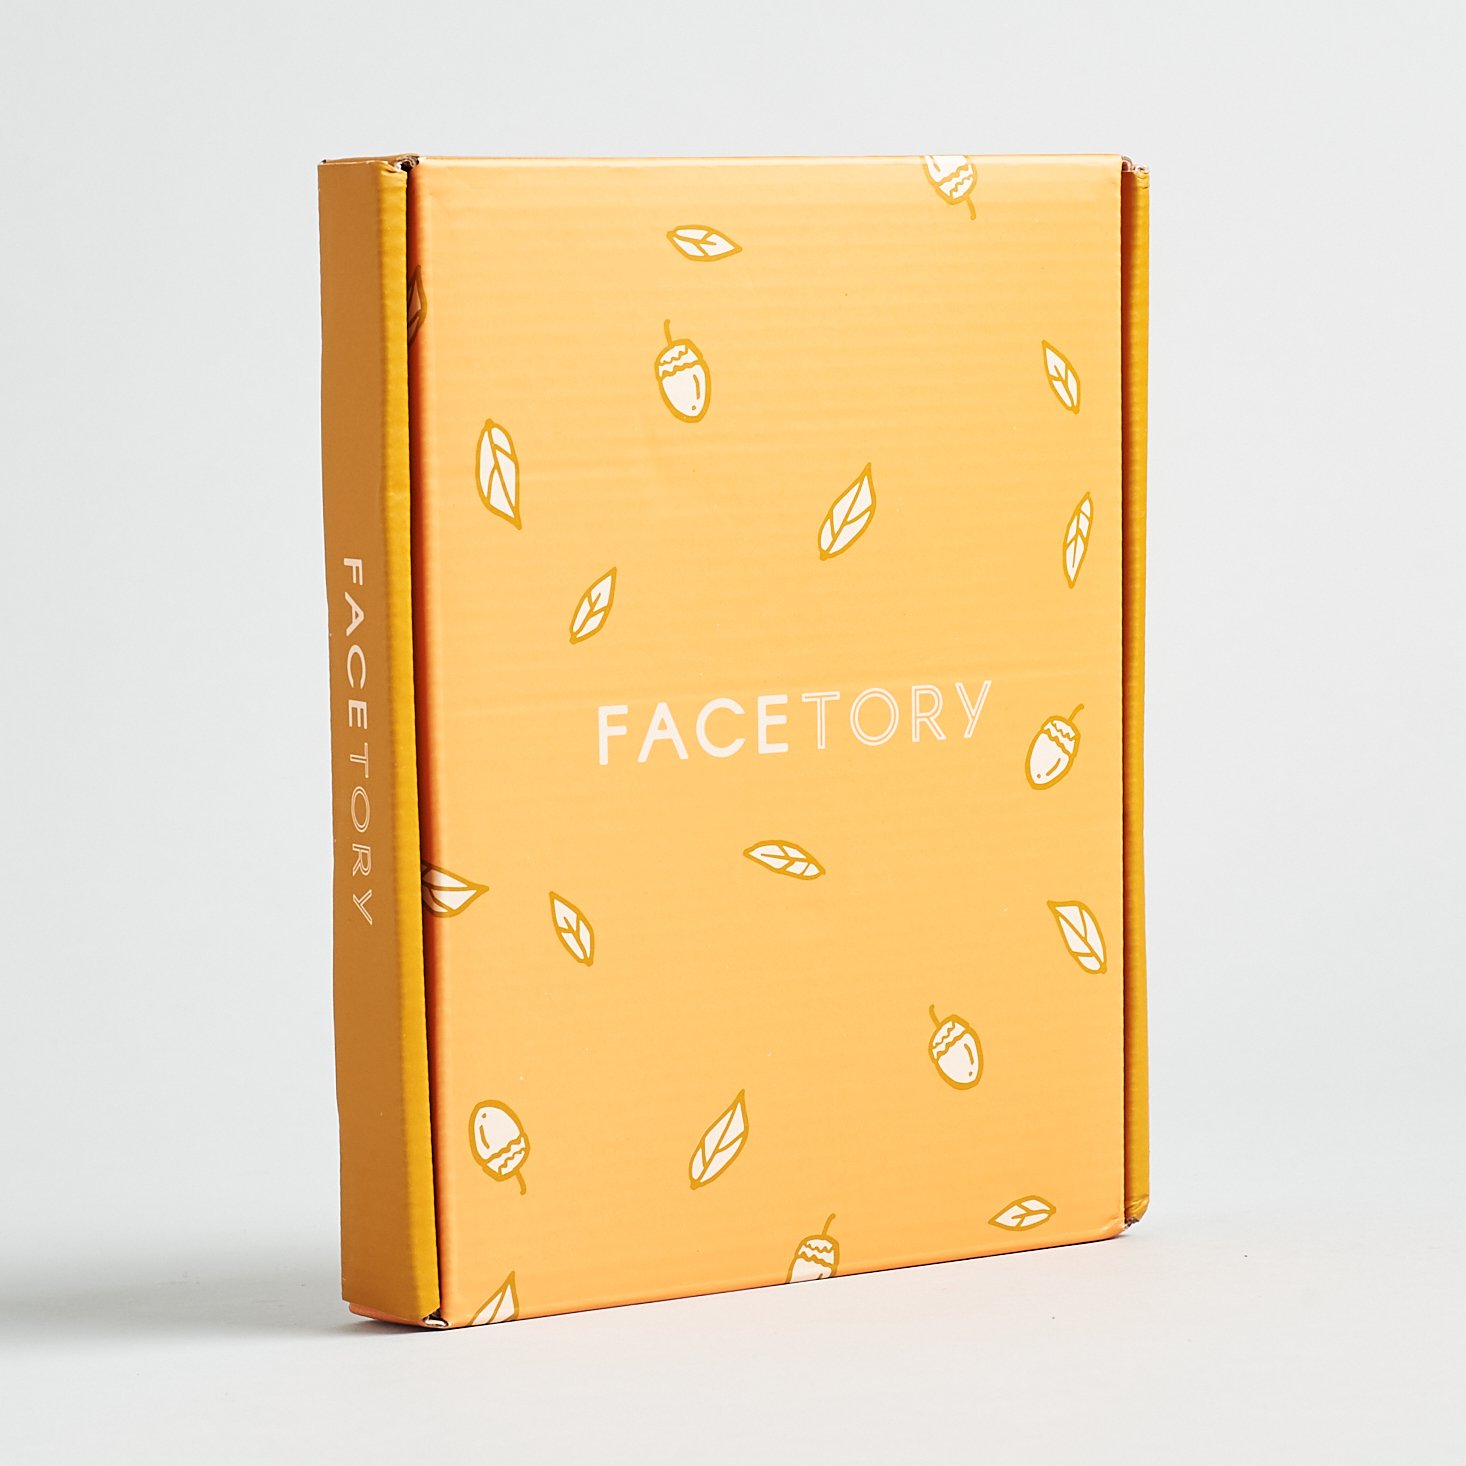 FaceTory 7 Lux Box August 2020 Spoiler + Coupon!